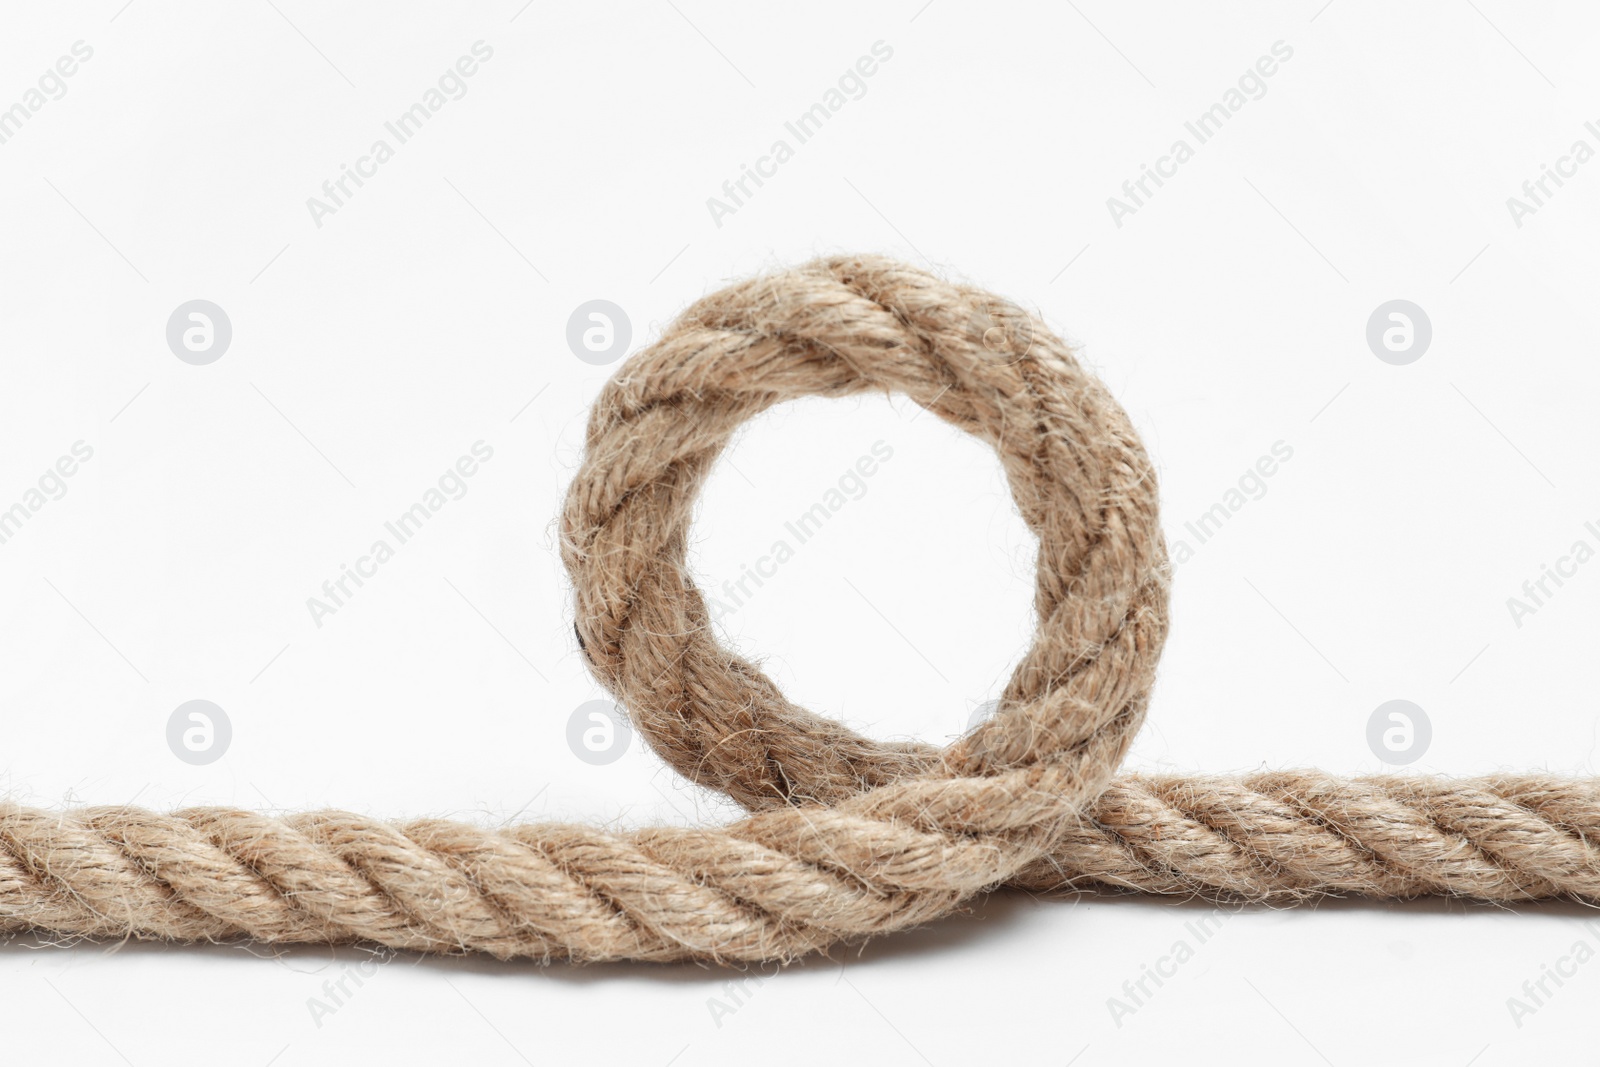 Photo of Loop made of cotton rope on white background